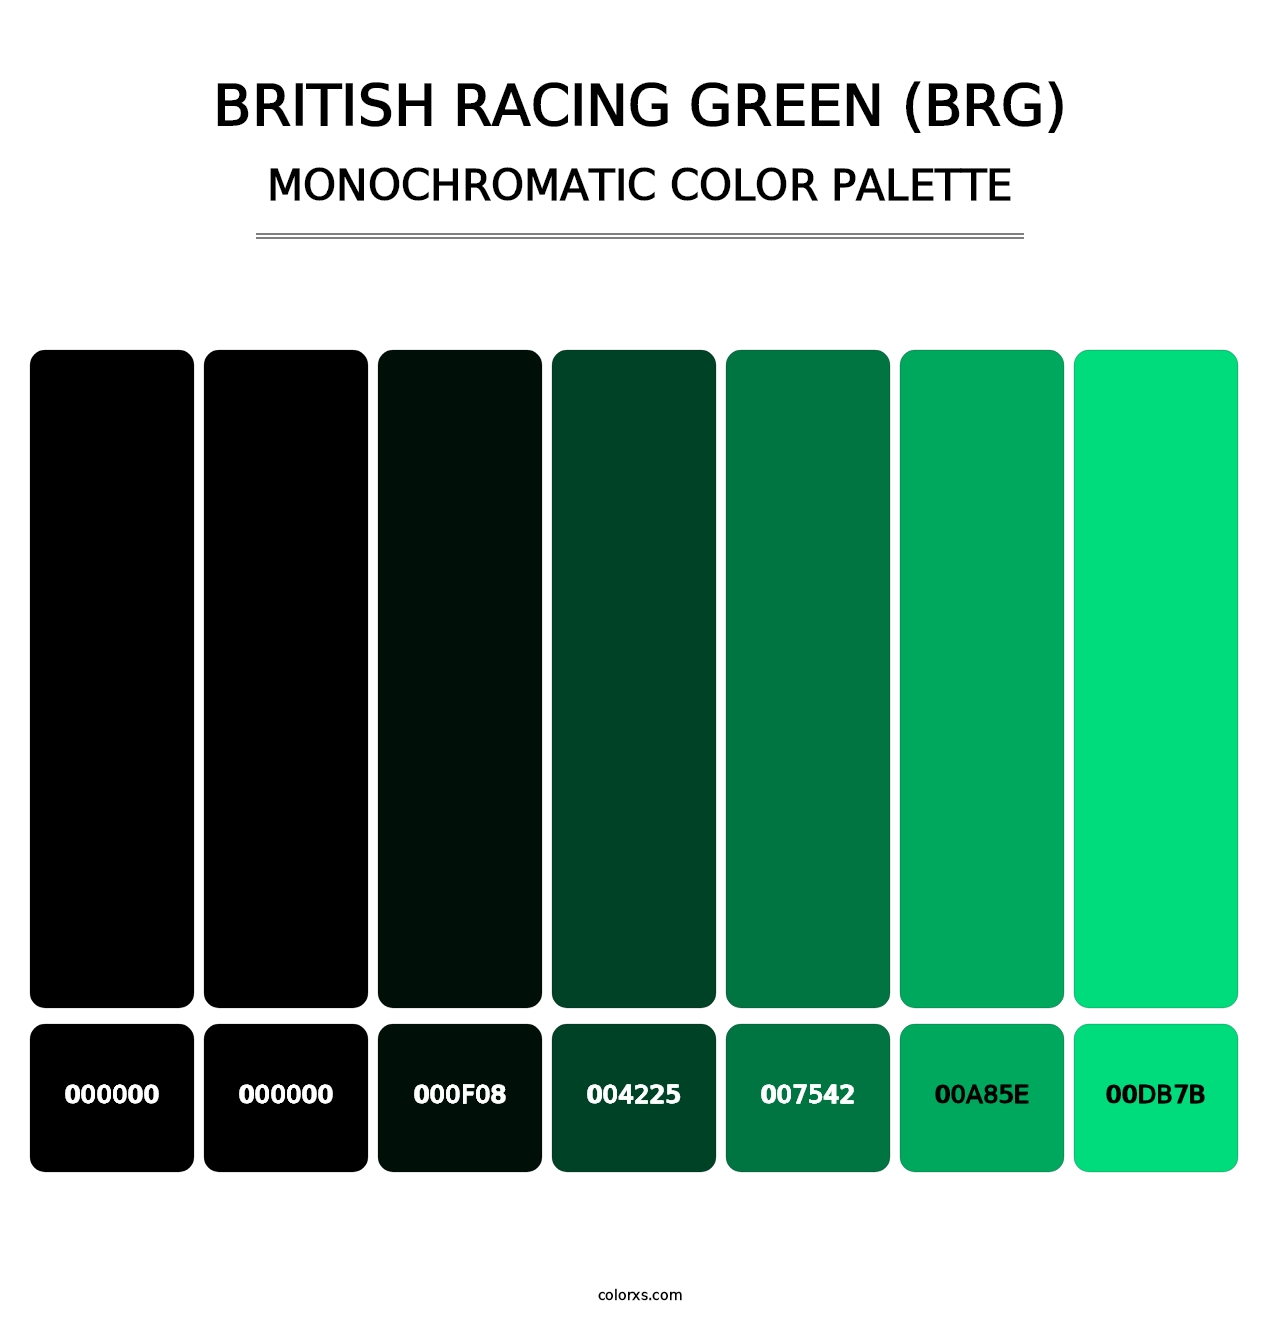 British Racing Green (BRG) - Monochromatic Color Palette